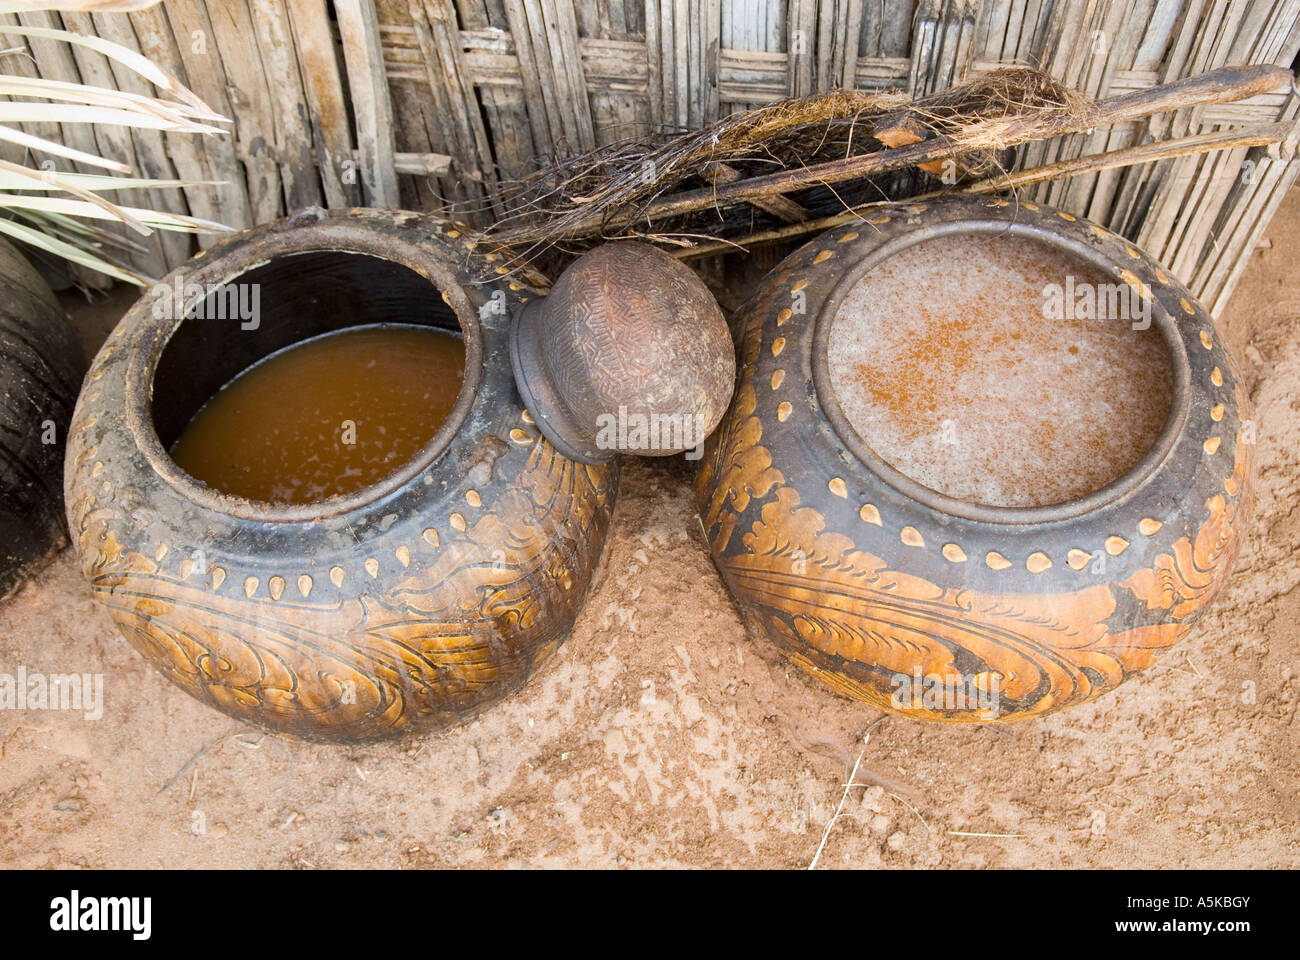 Fermentation of palm juice for the production of Toddy palmwine, Bagan, Myanmar Stock Photo